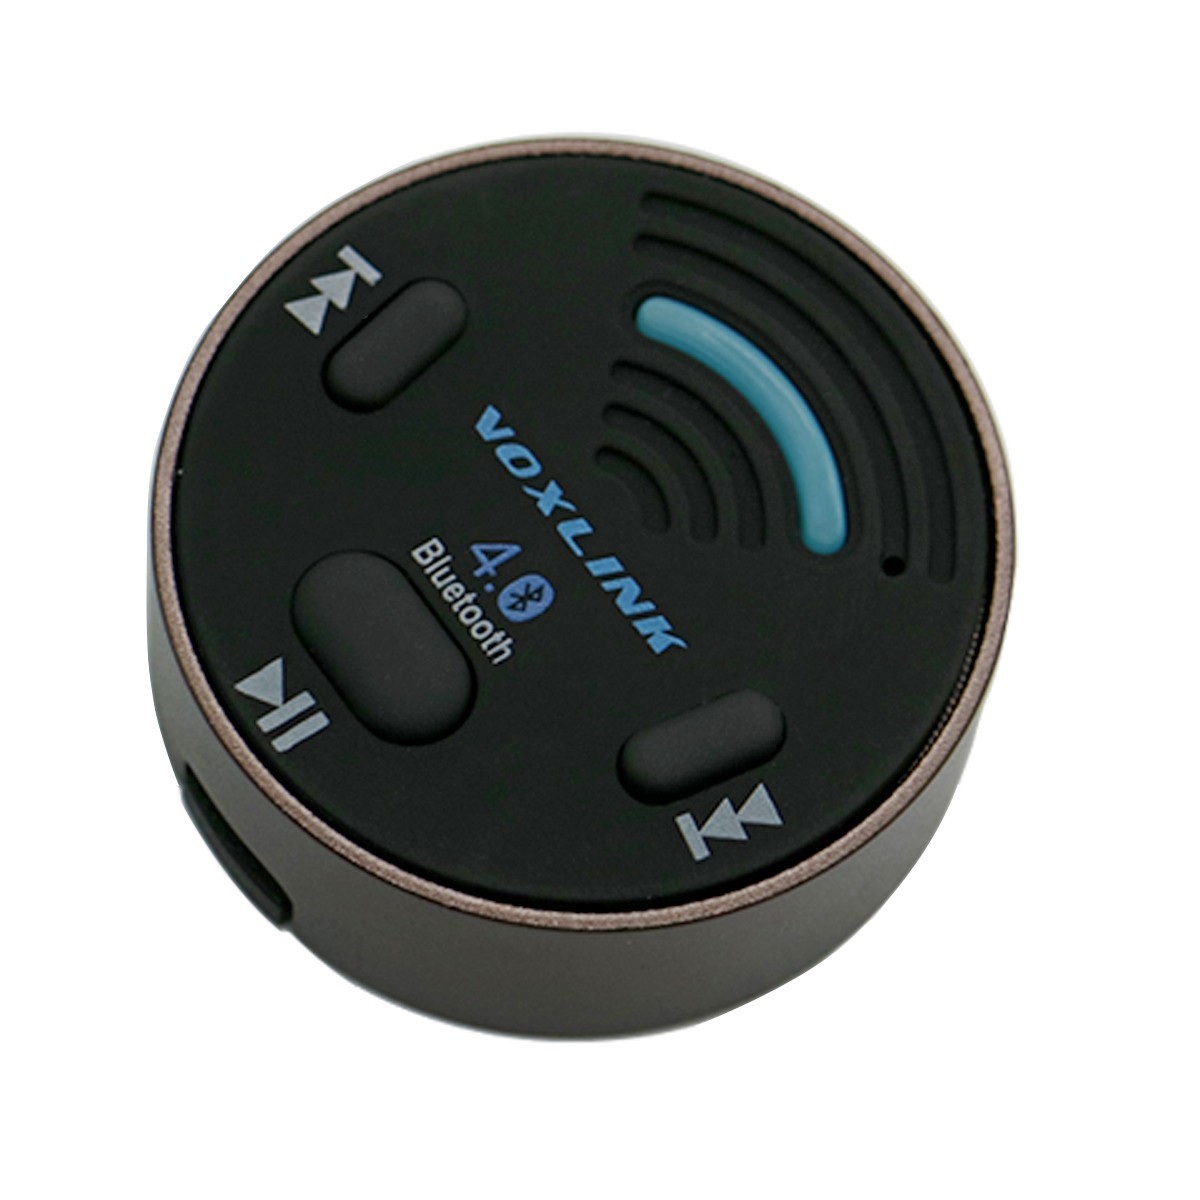 Voxlink Bluetooth 4.0 Music Receiver 3.5mm Adapter Handsfree Car AUX Speaker for Iphone